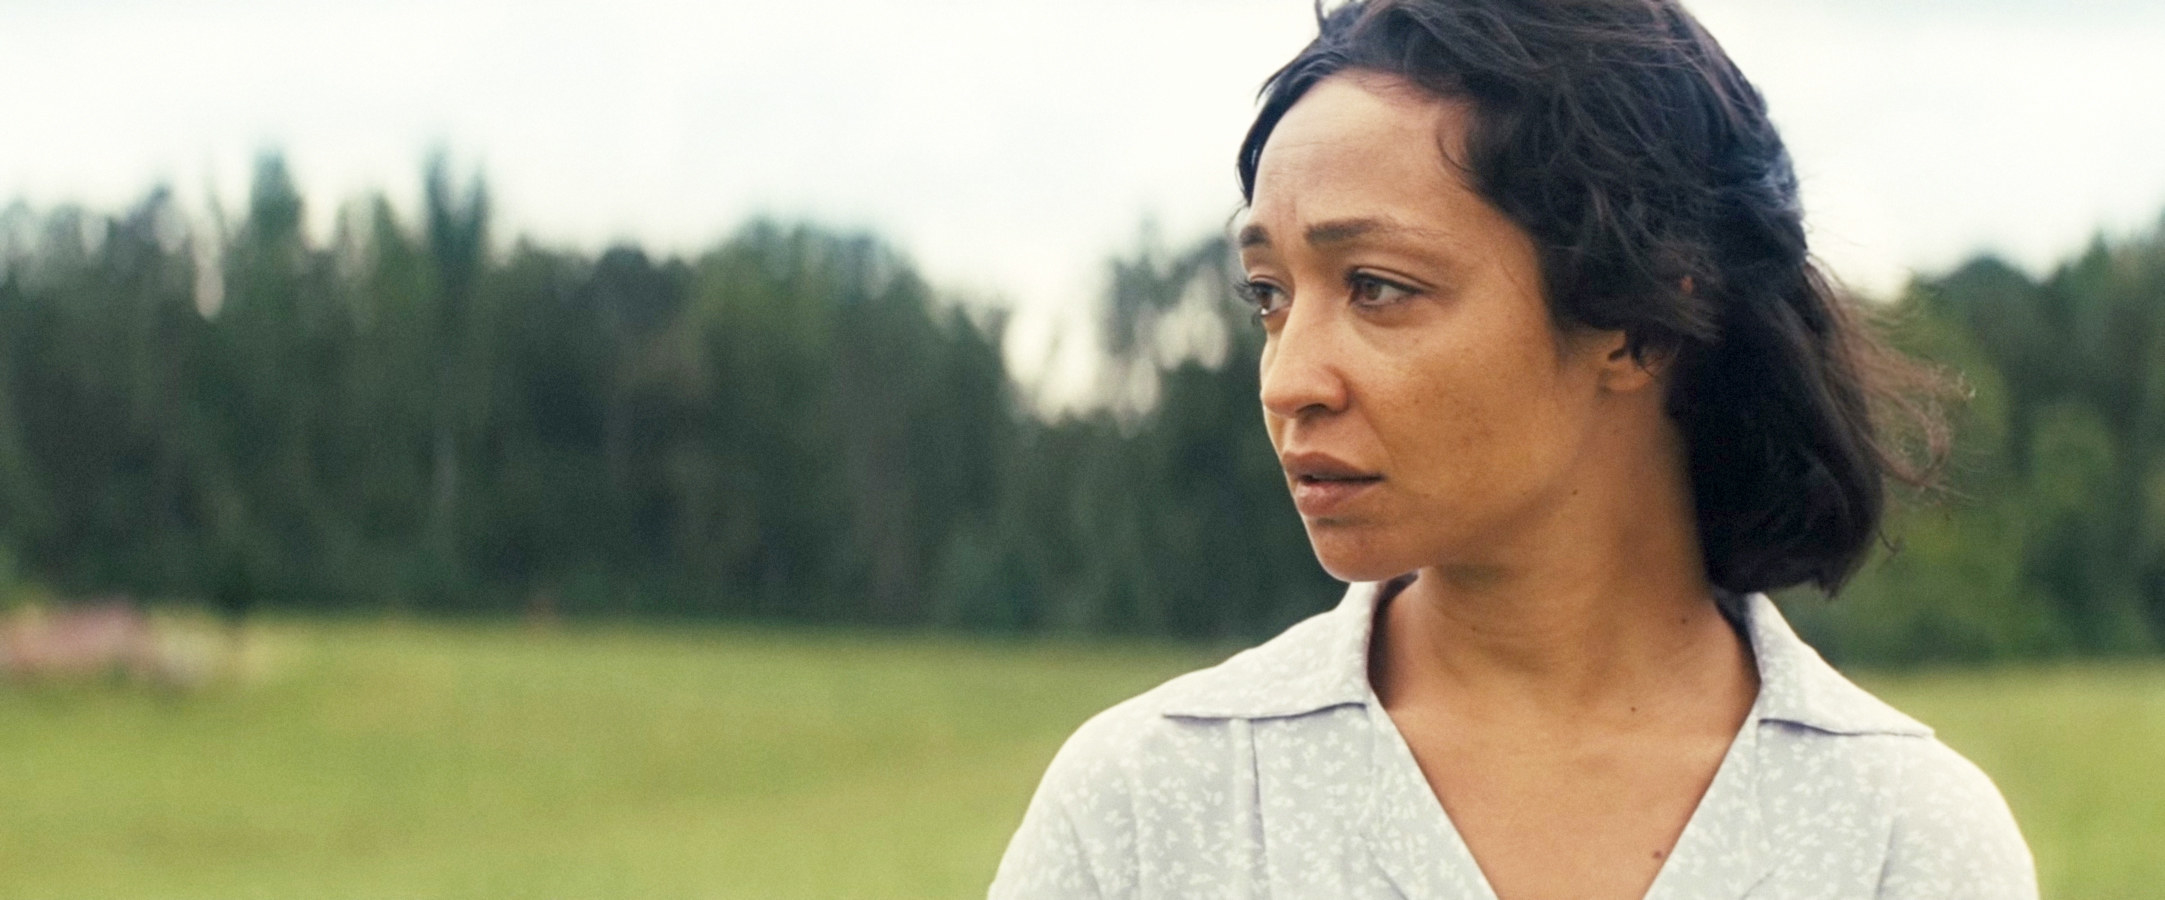 Ruth Negga with her hair tied back, in a house dress, looking out over her shoulder standing in a field